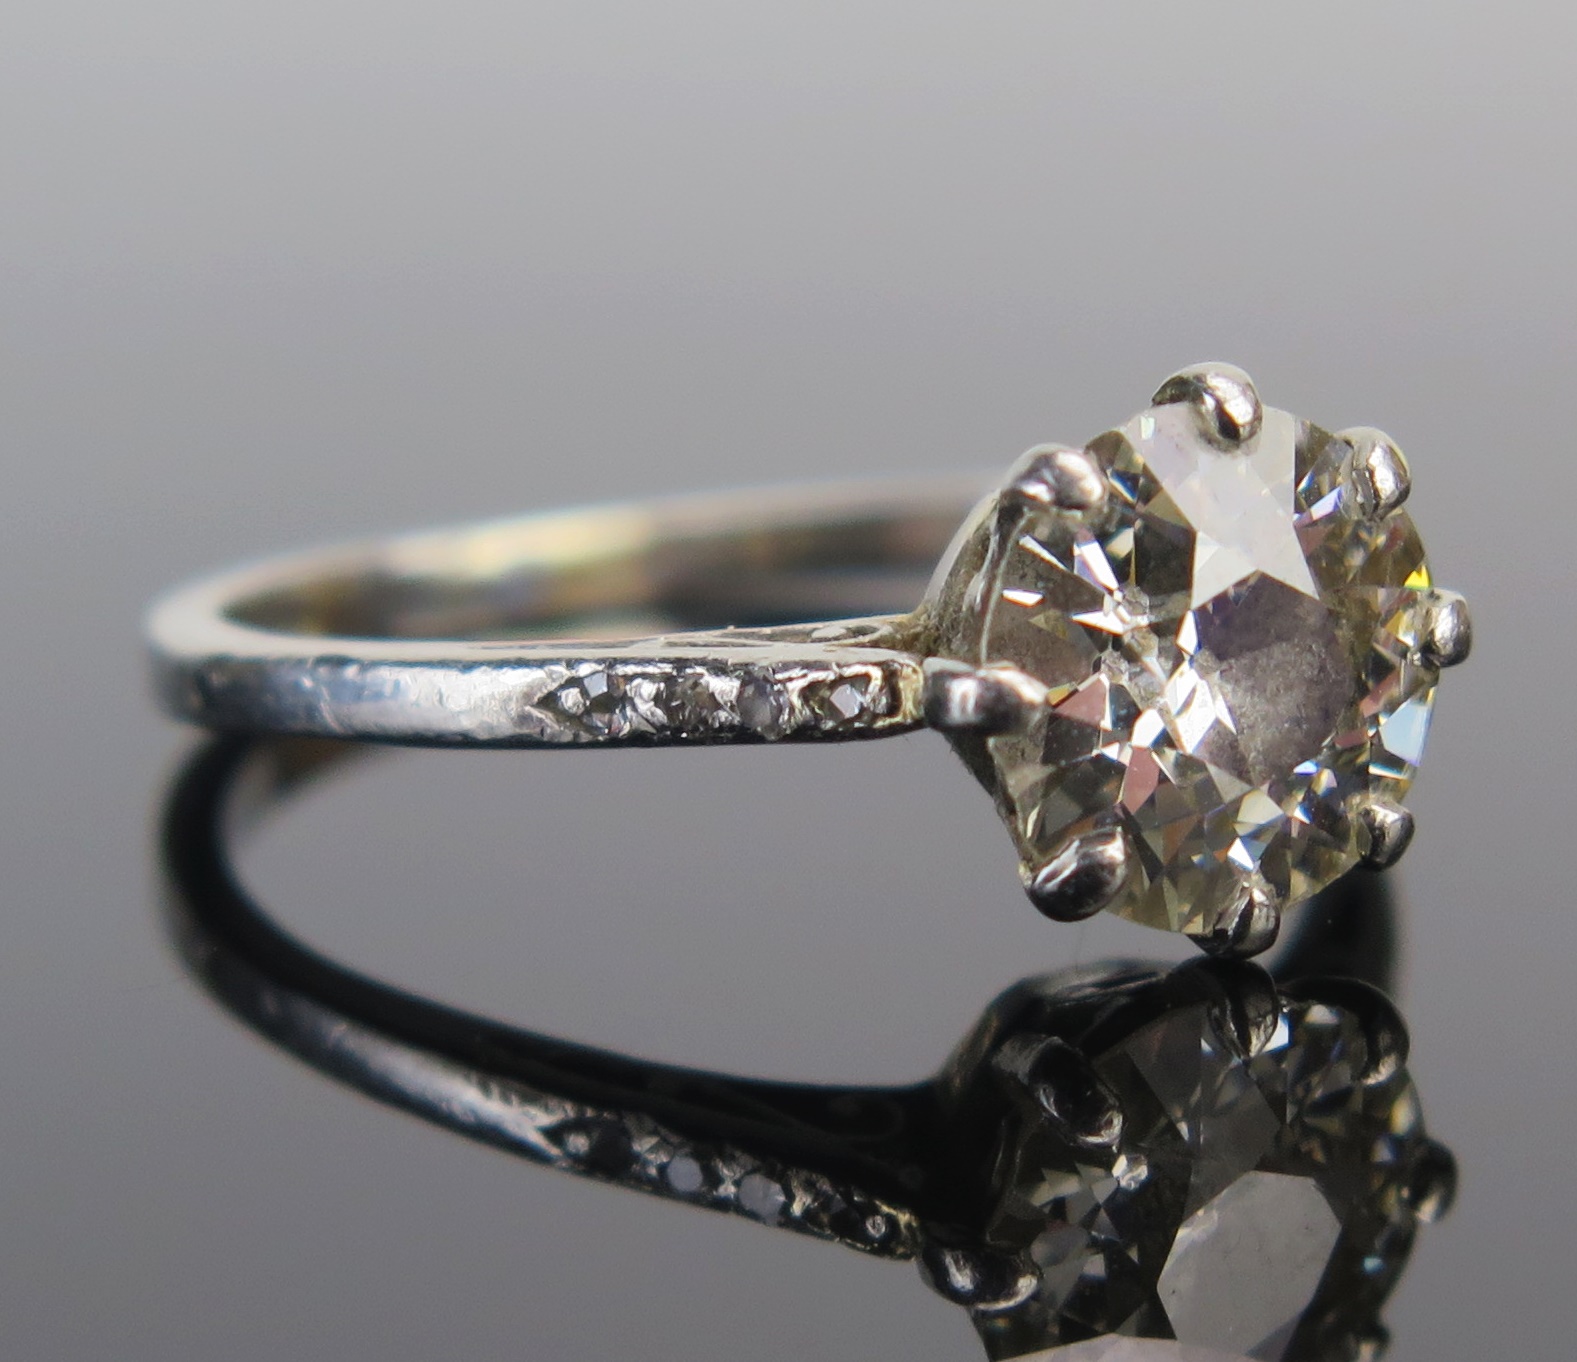 A Diamond Solitaire Ring in a precious white metal setting, the c. 8.1mm old European cut stone in a - Image 2 of 3